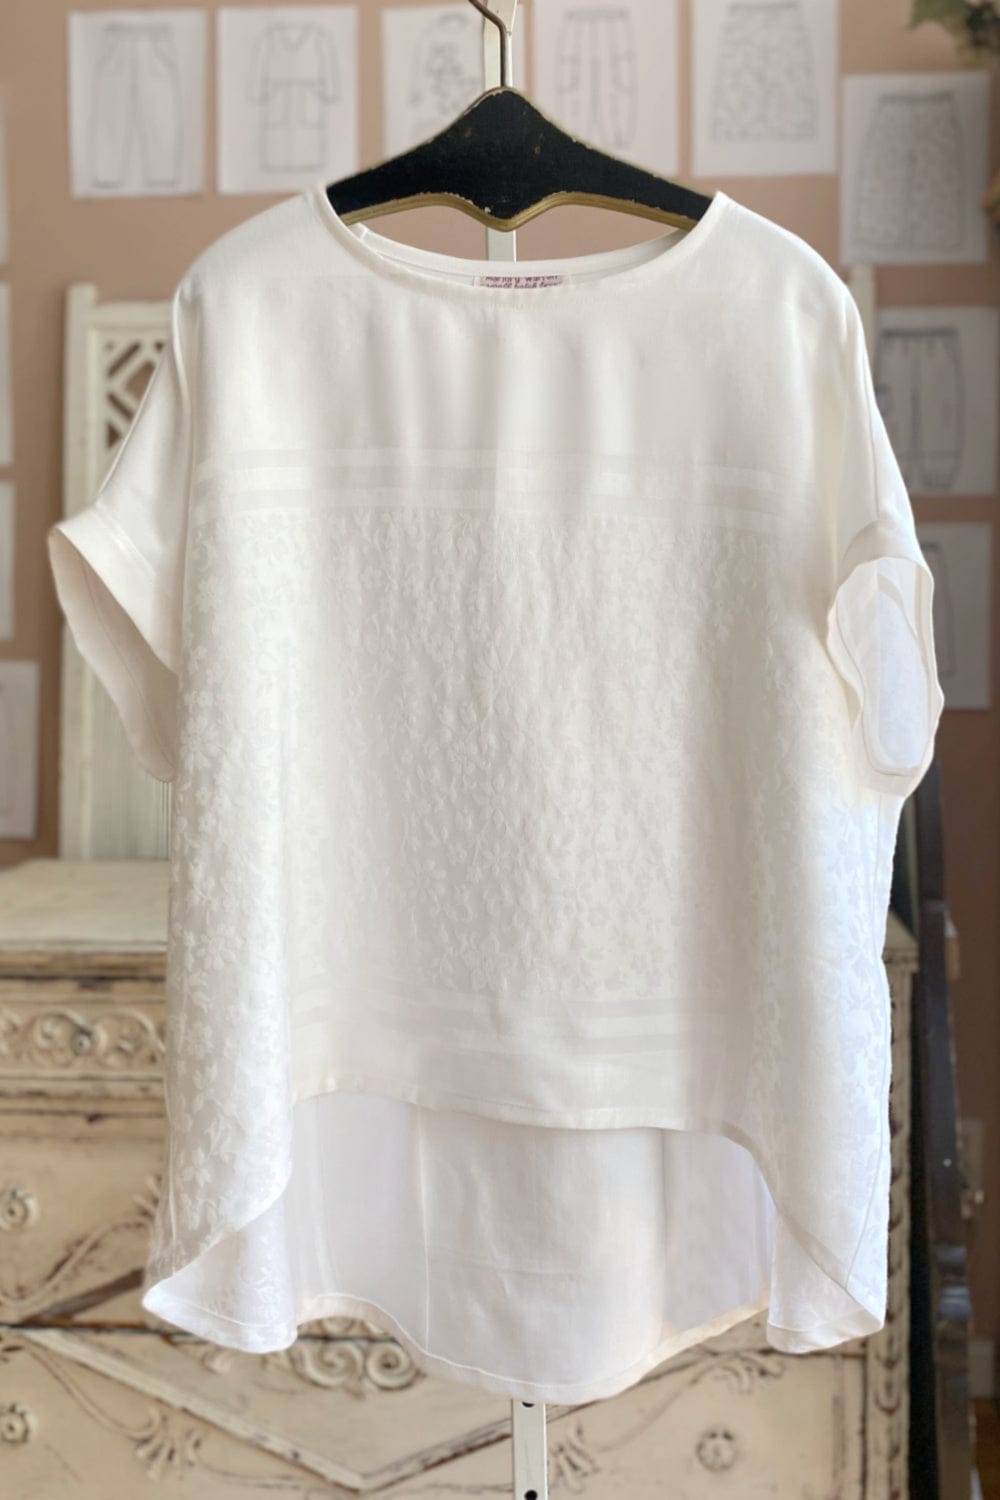 Short sleeve women's white curved hem top with damask linen detail.